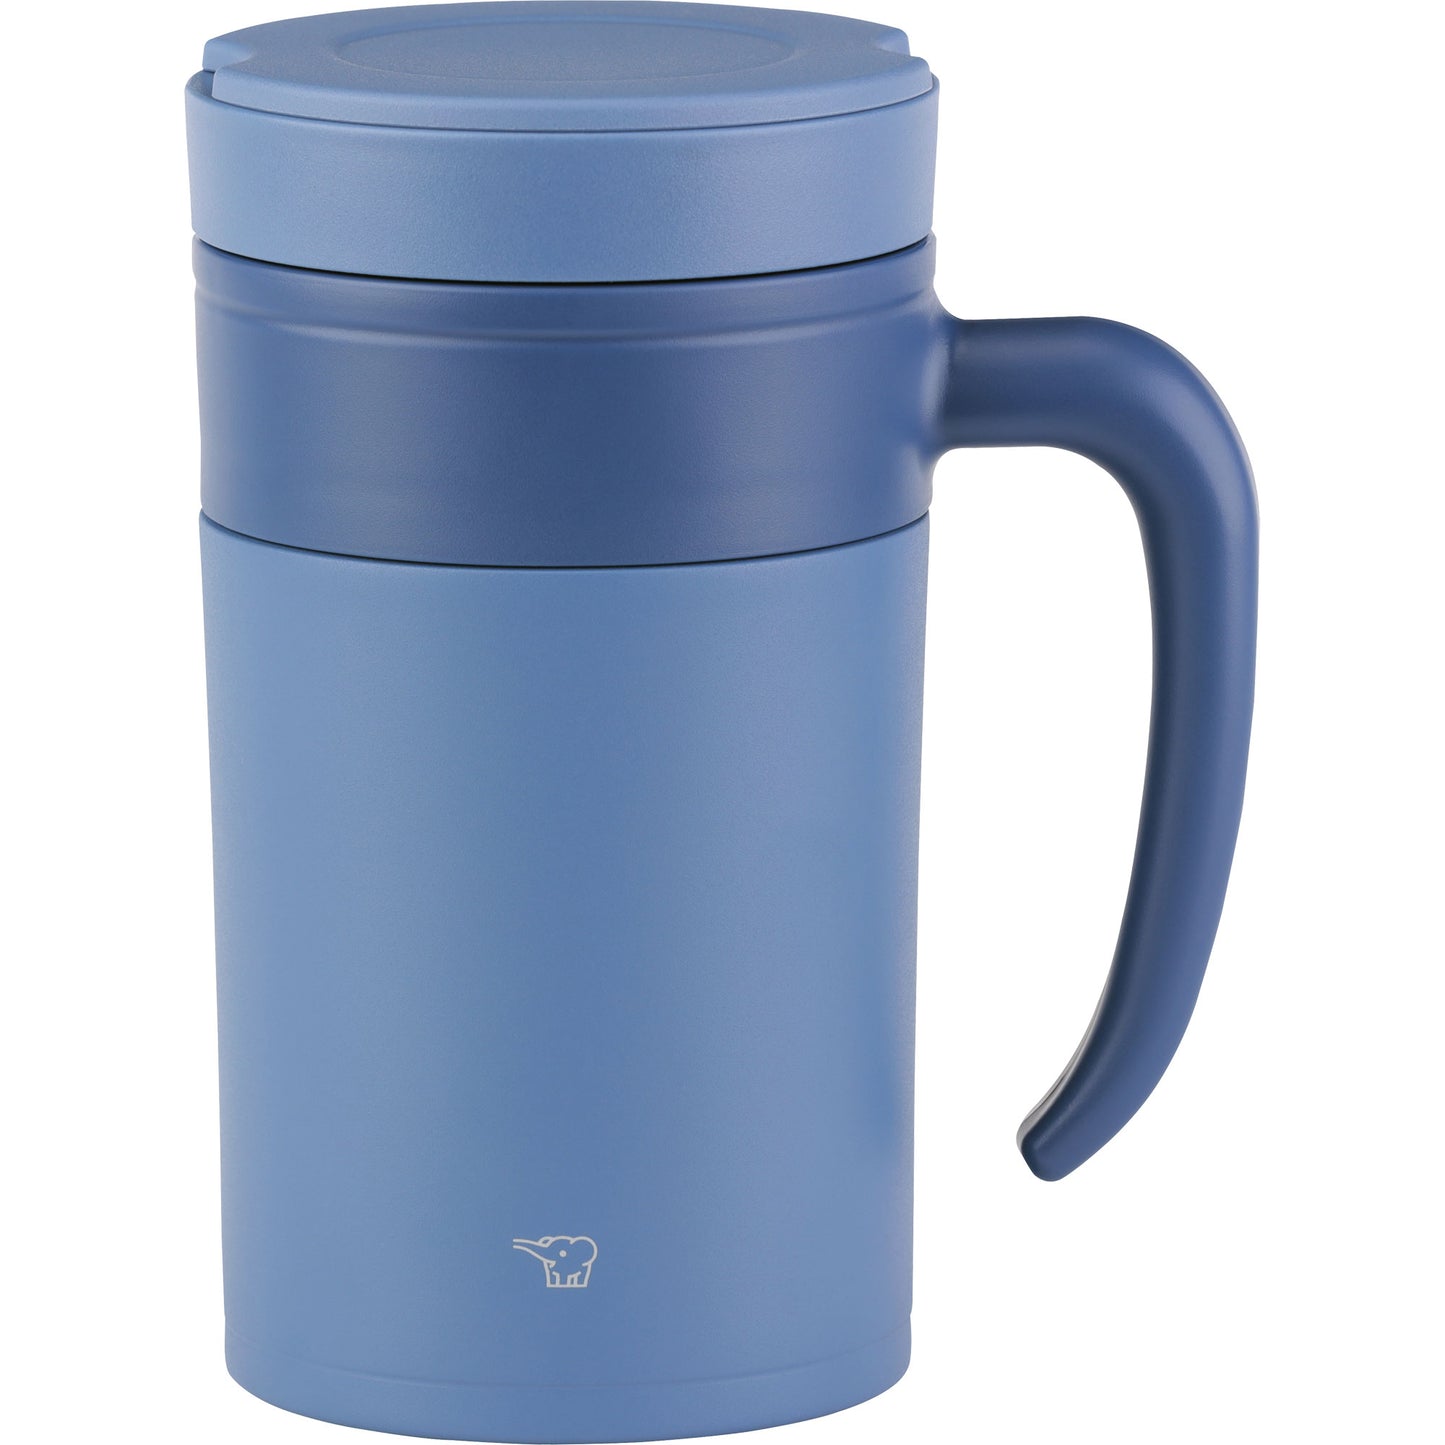 Zojirushi Makes the Best Stainless Steel Travel Mug for Coffee